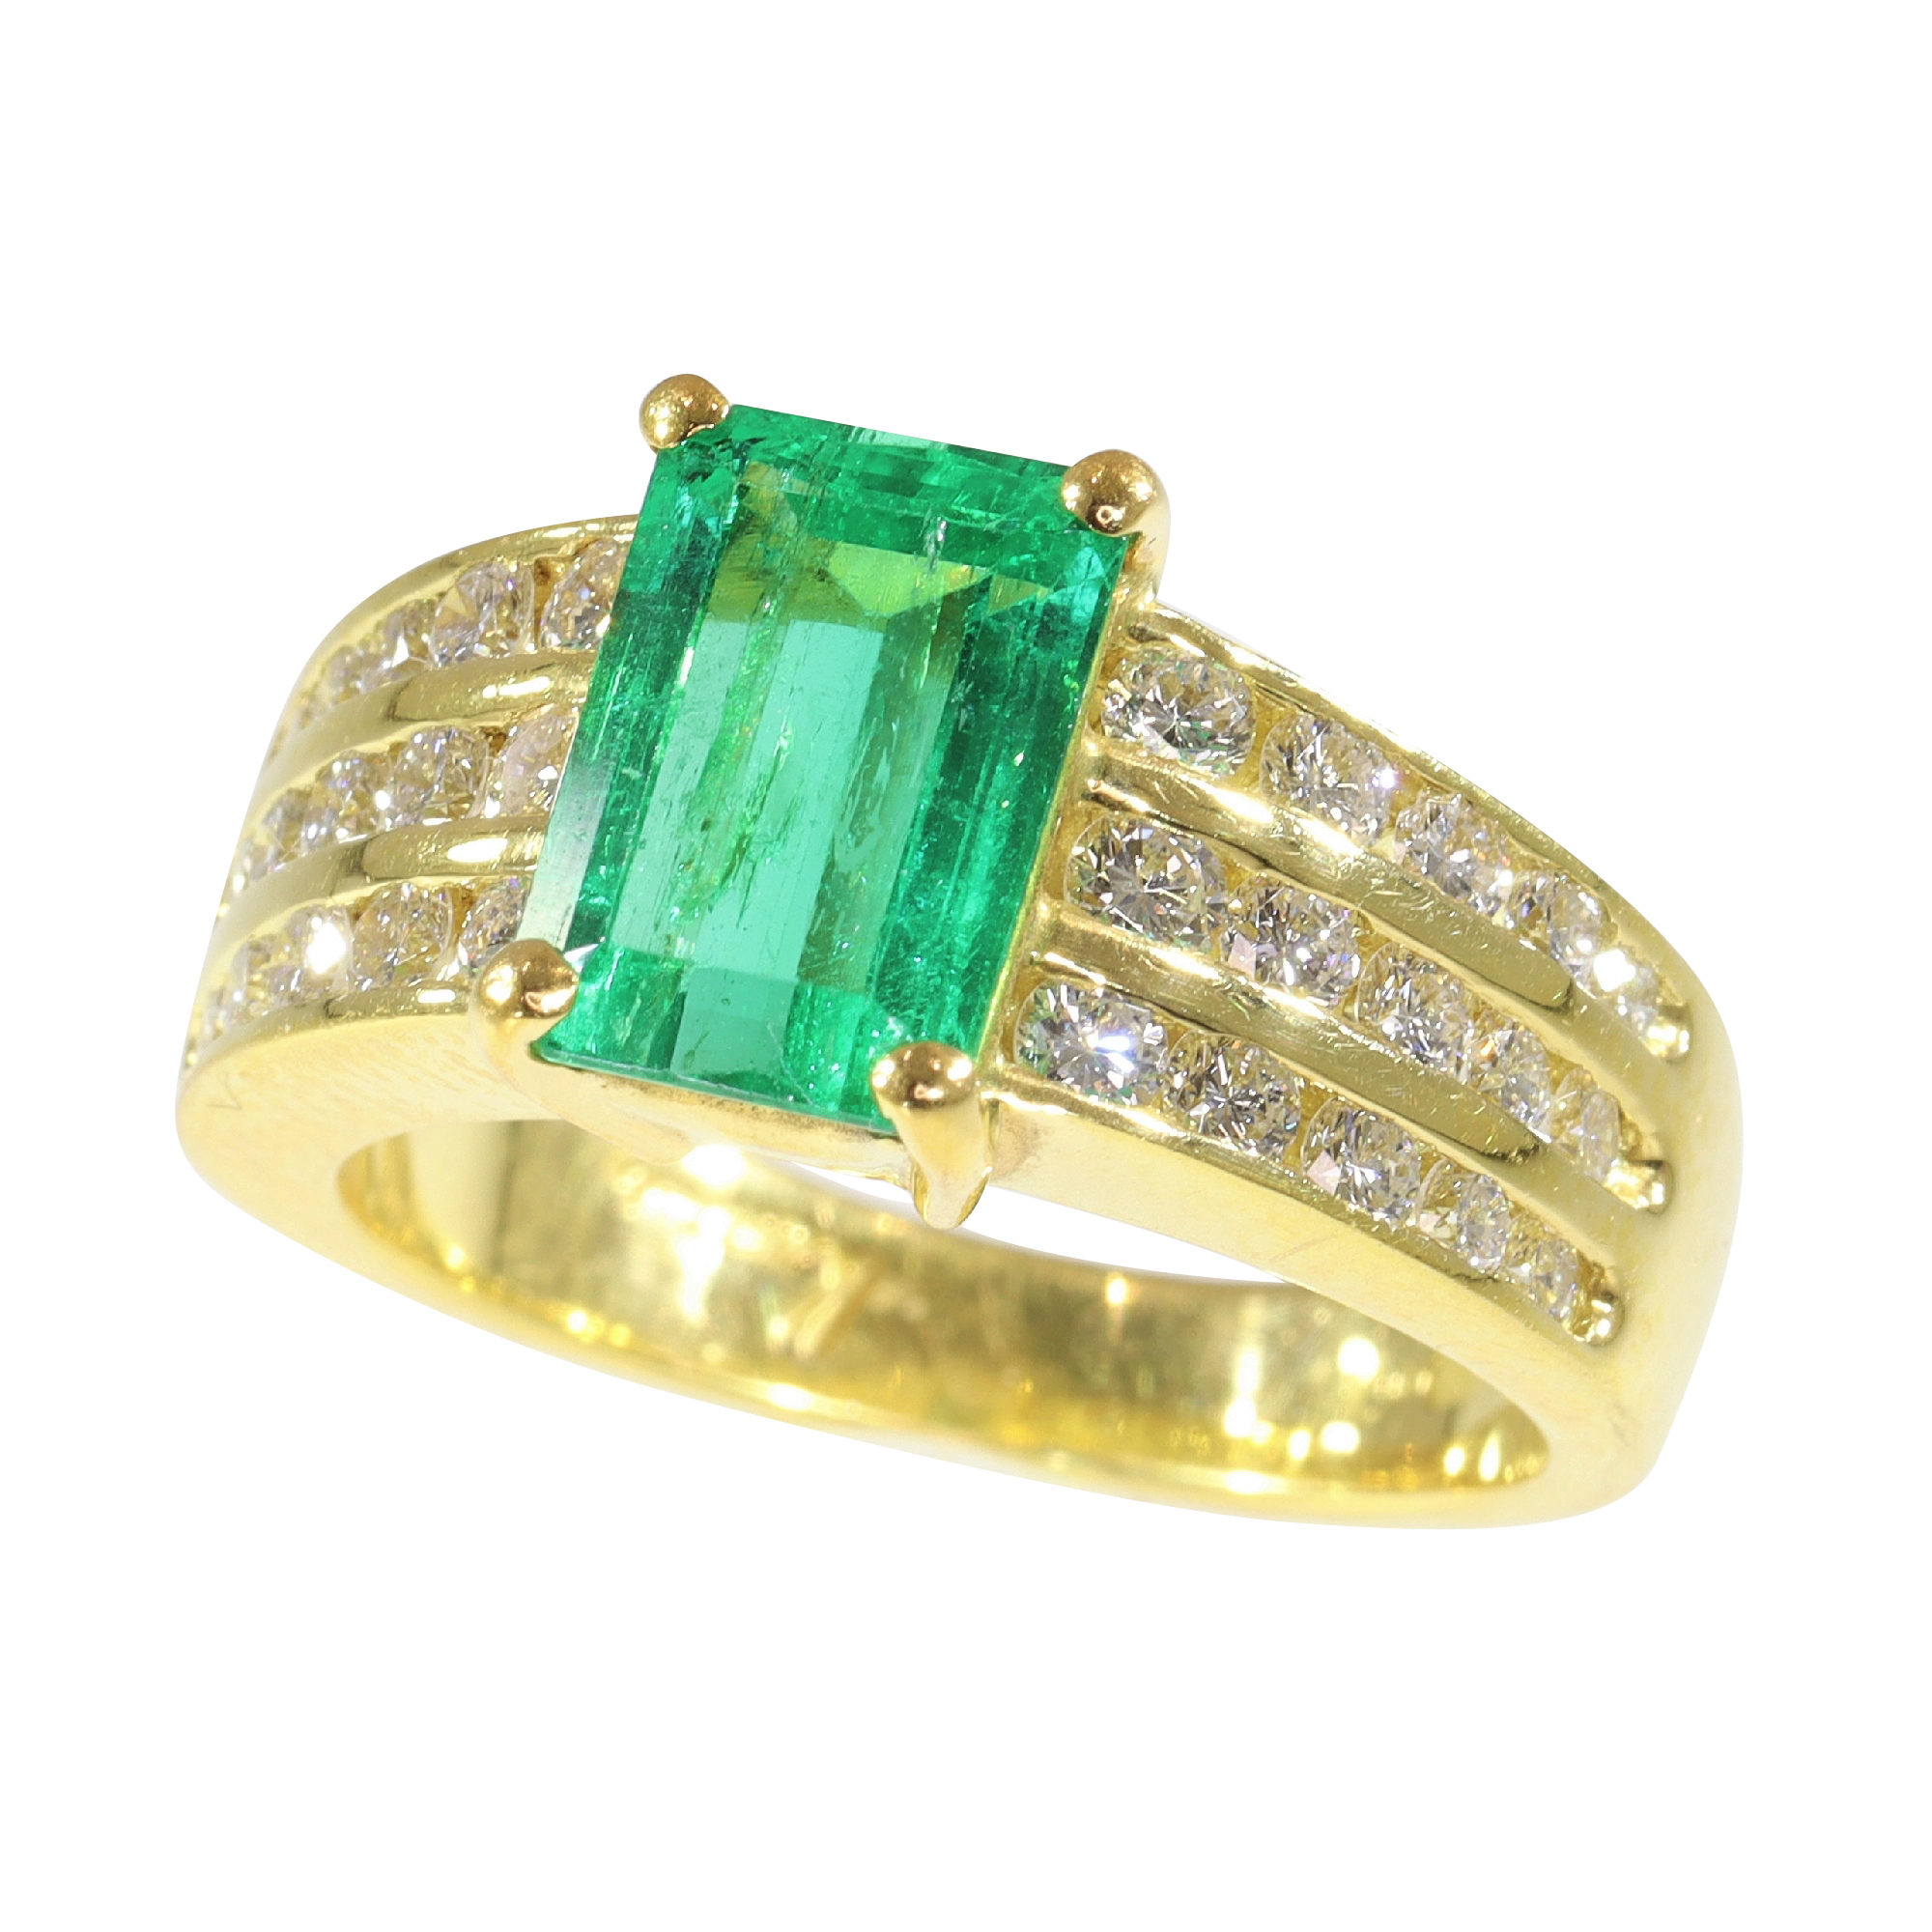 Kutchinsky's Green Splendour: 2.33ct Emerald Engagement Ring with Diamond Accents